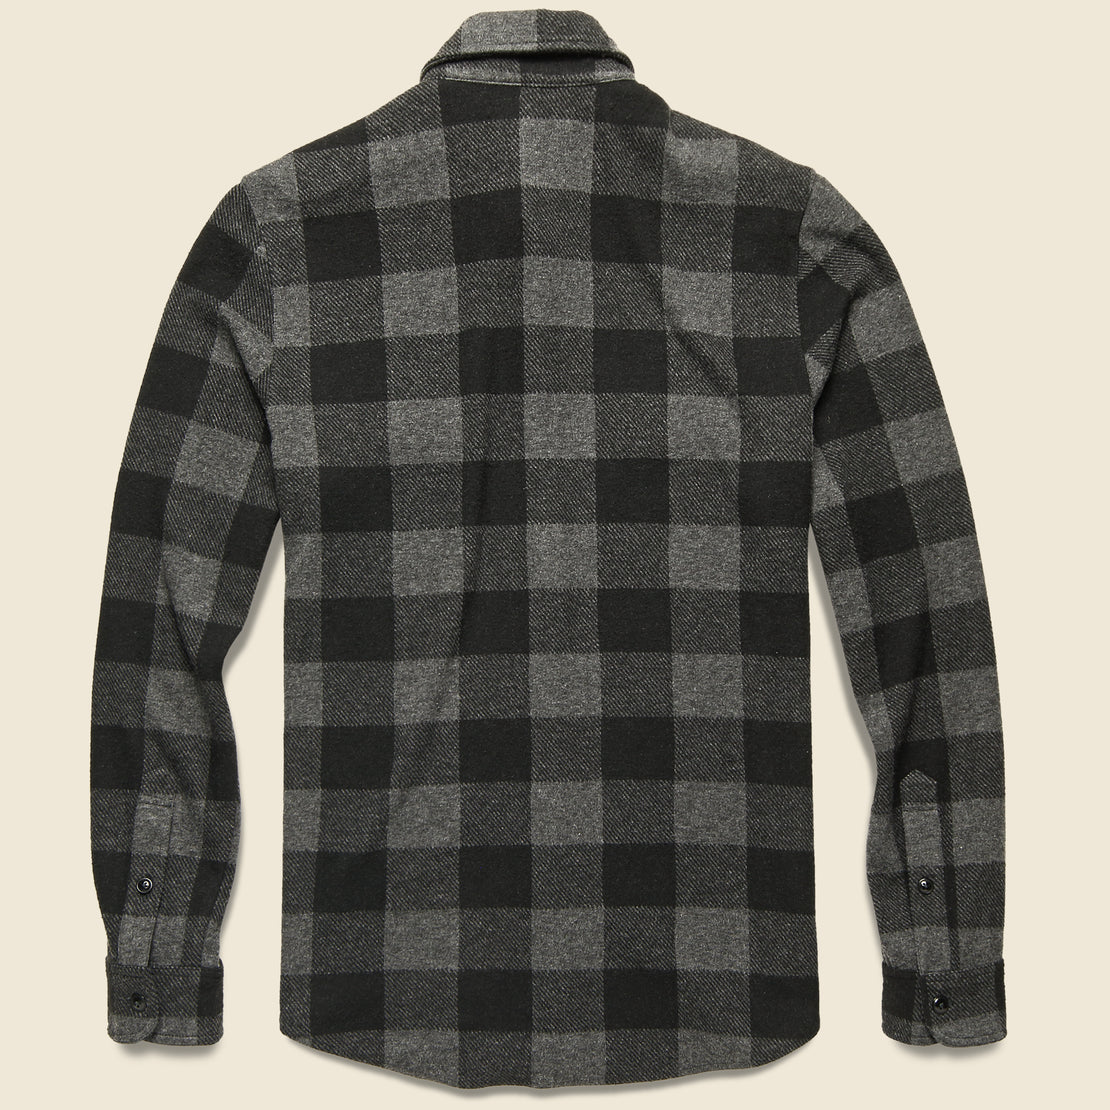 Legend Sweater Shirt - Charcoal Black Buffalo - Faherty - STAG Provisions - Tops - Sweater